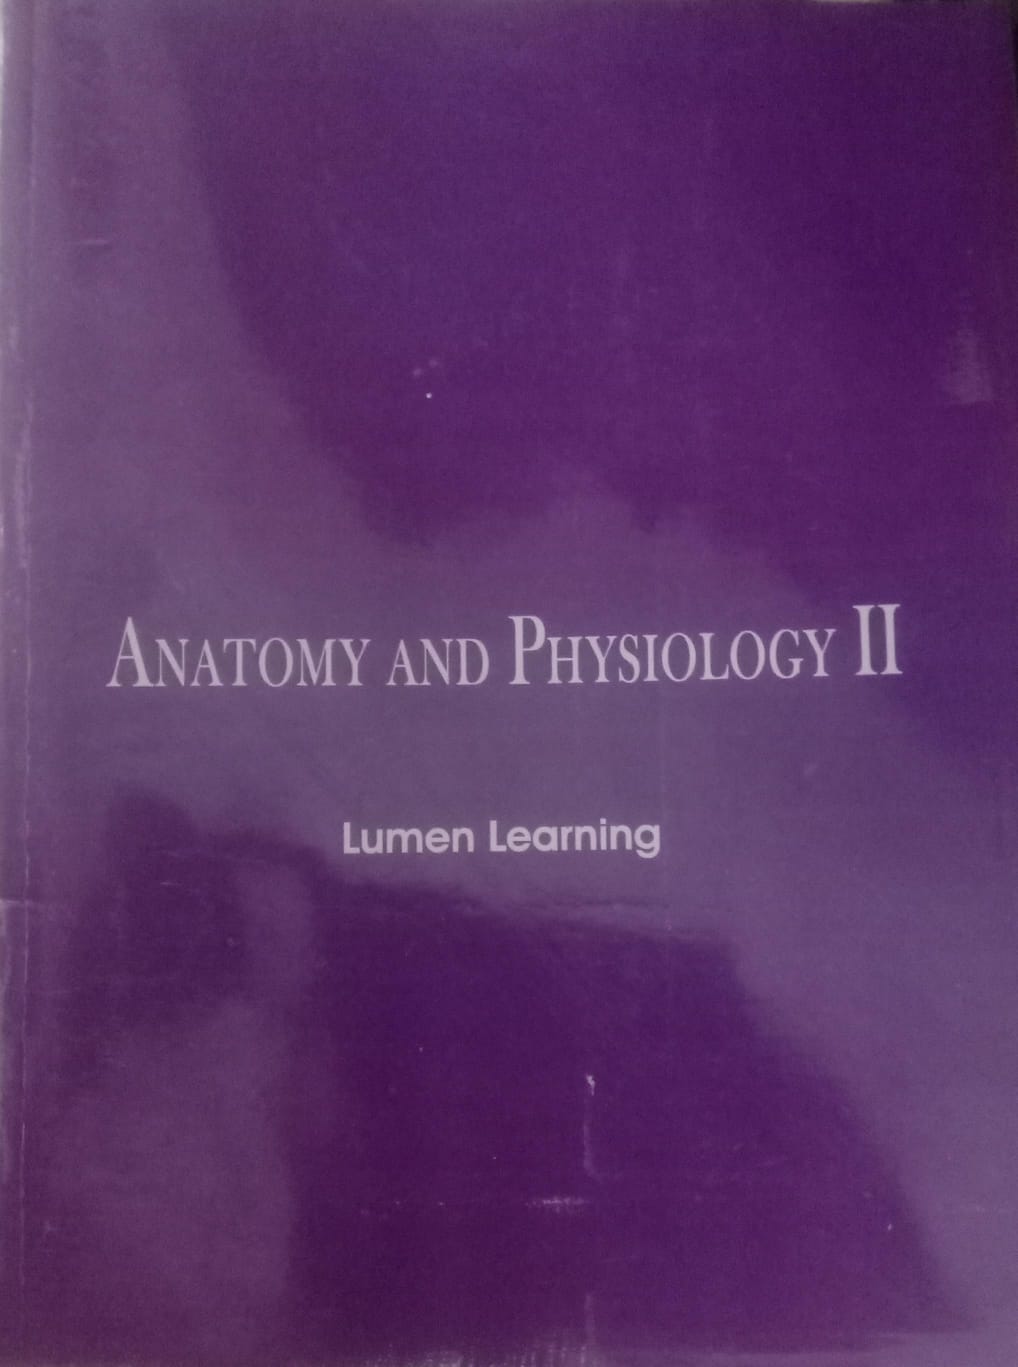 ANATOMY  AND PHYSIOLOGY 2 LUMEN LEARNING   1 e